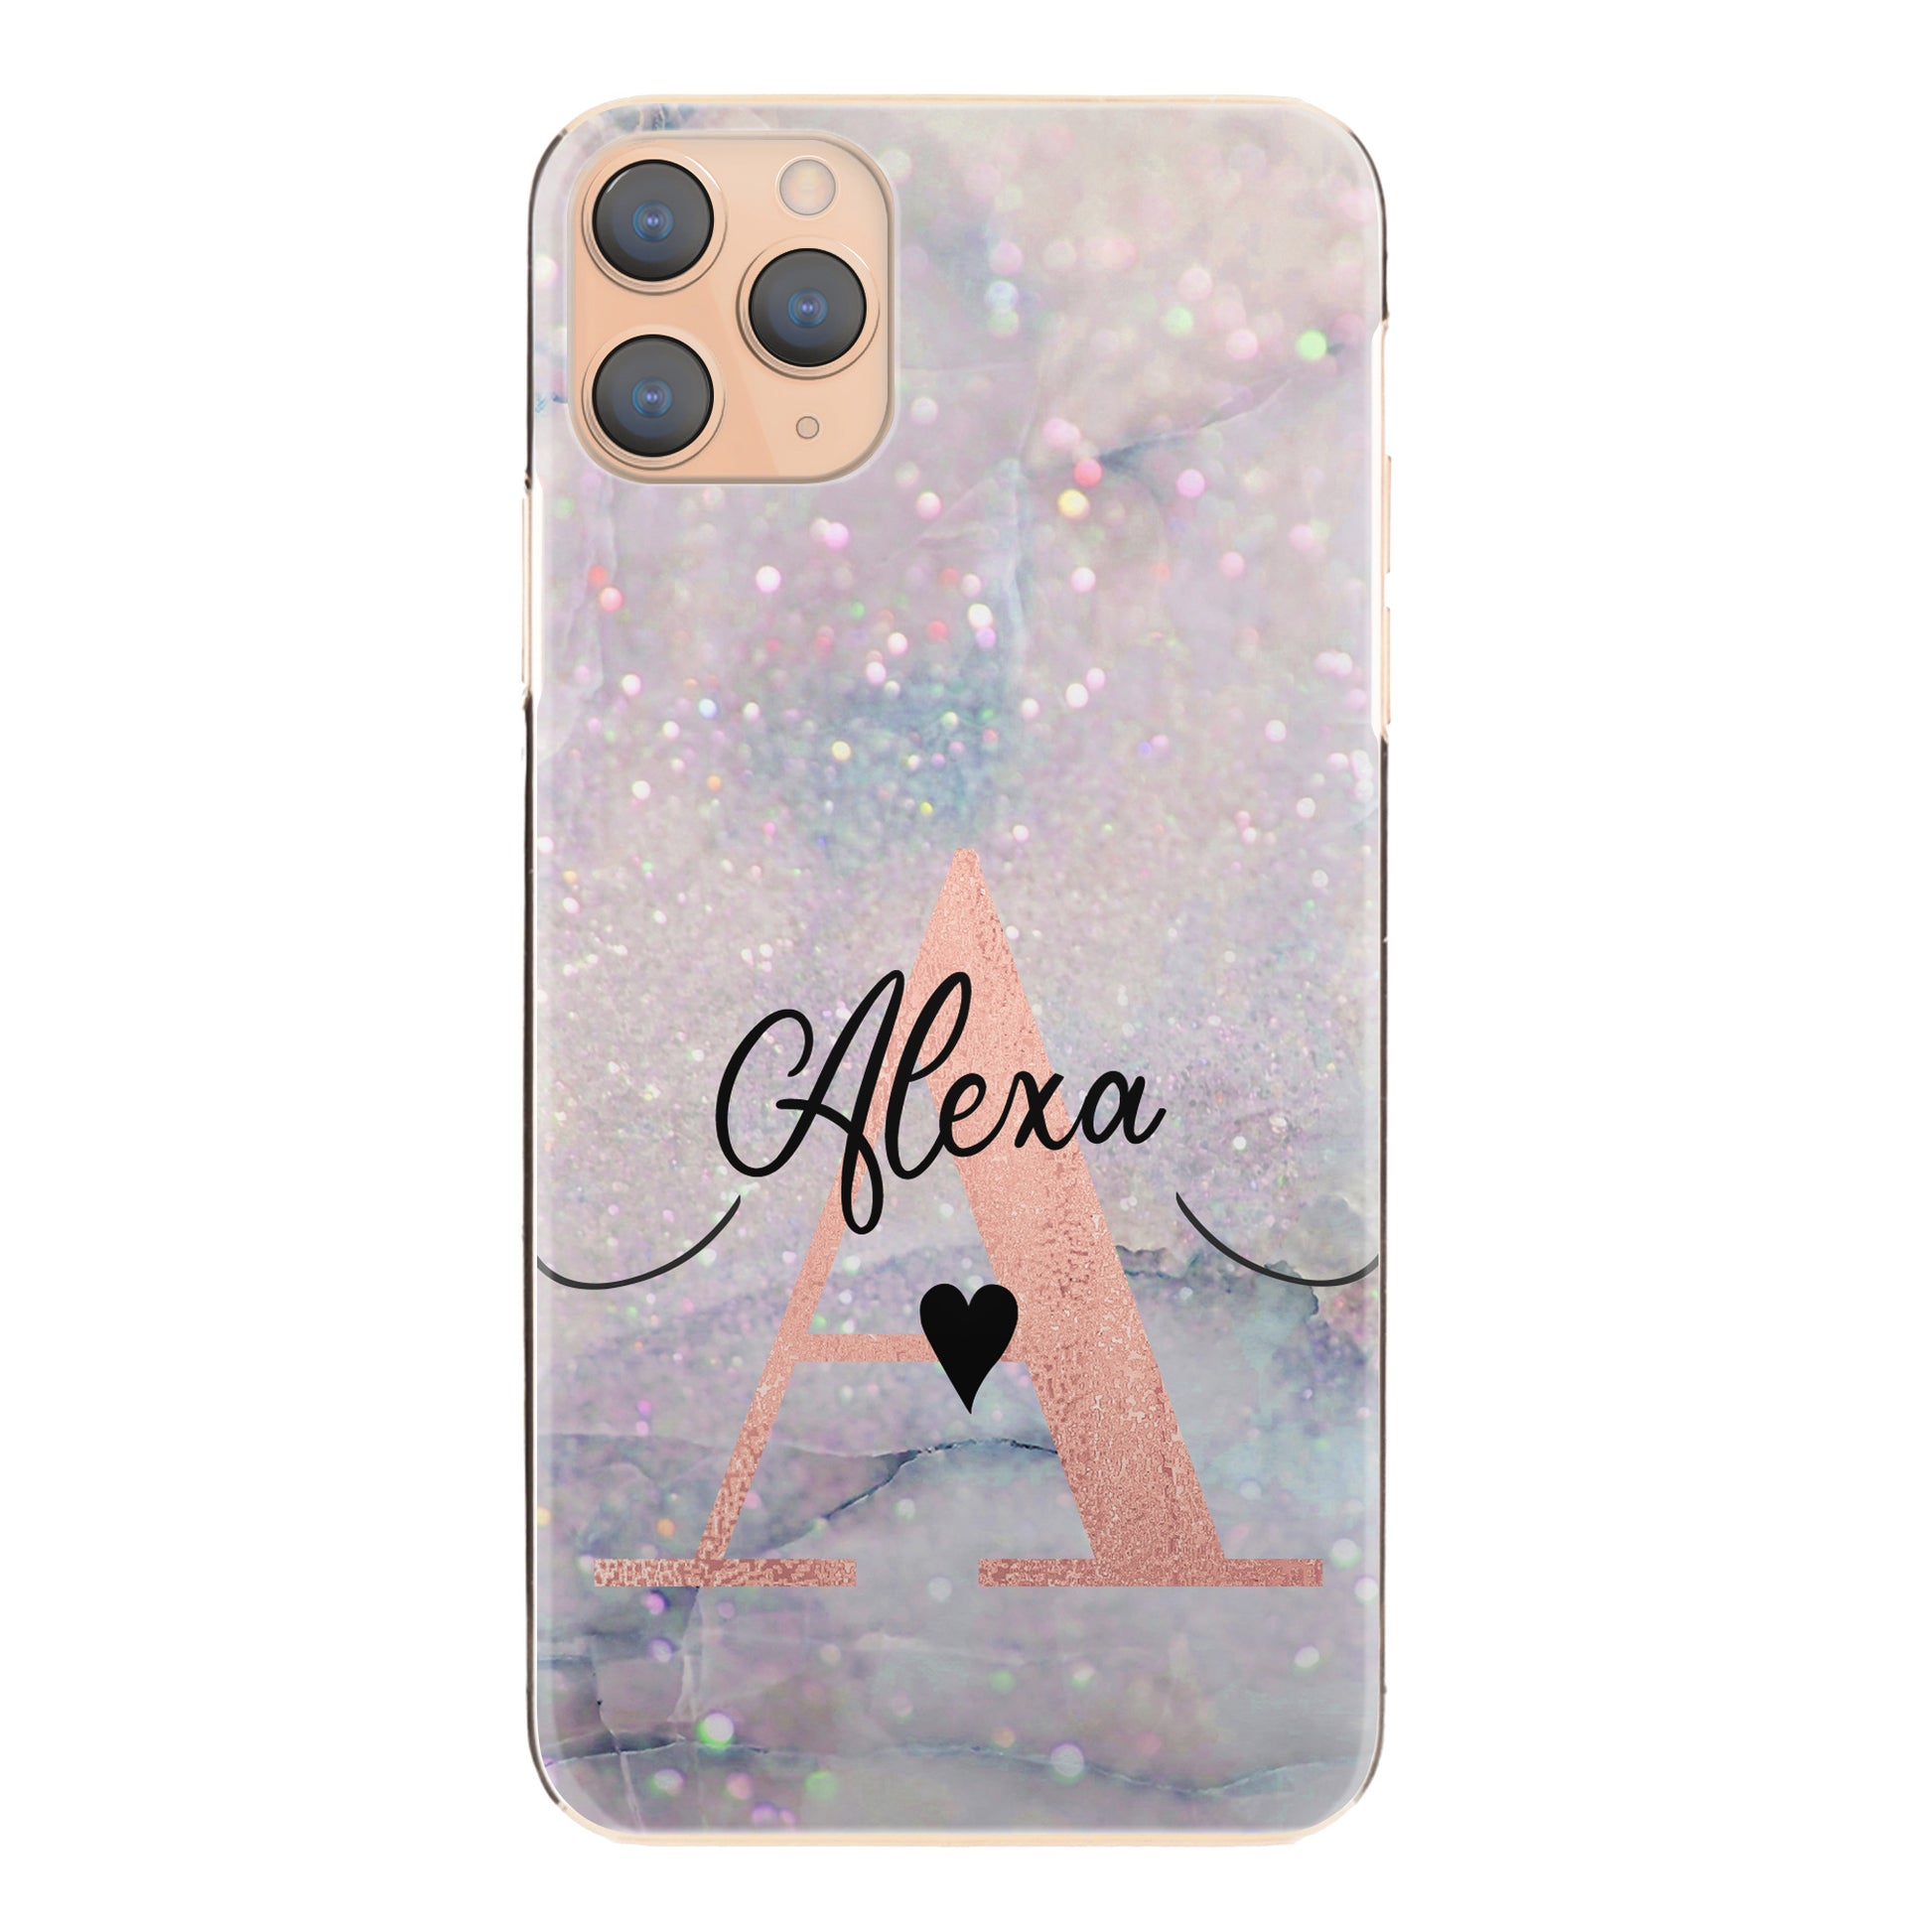 Personalised Xiaomi Phone Hard Case with Stylish Heart Text and Pink Initial on Textured Glitter Effect